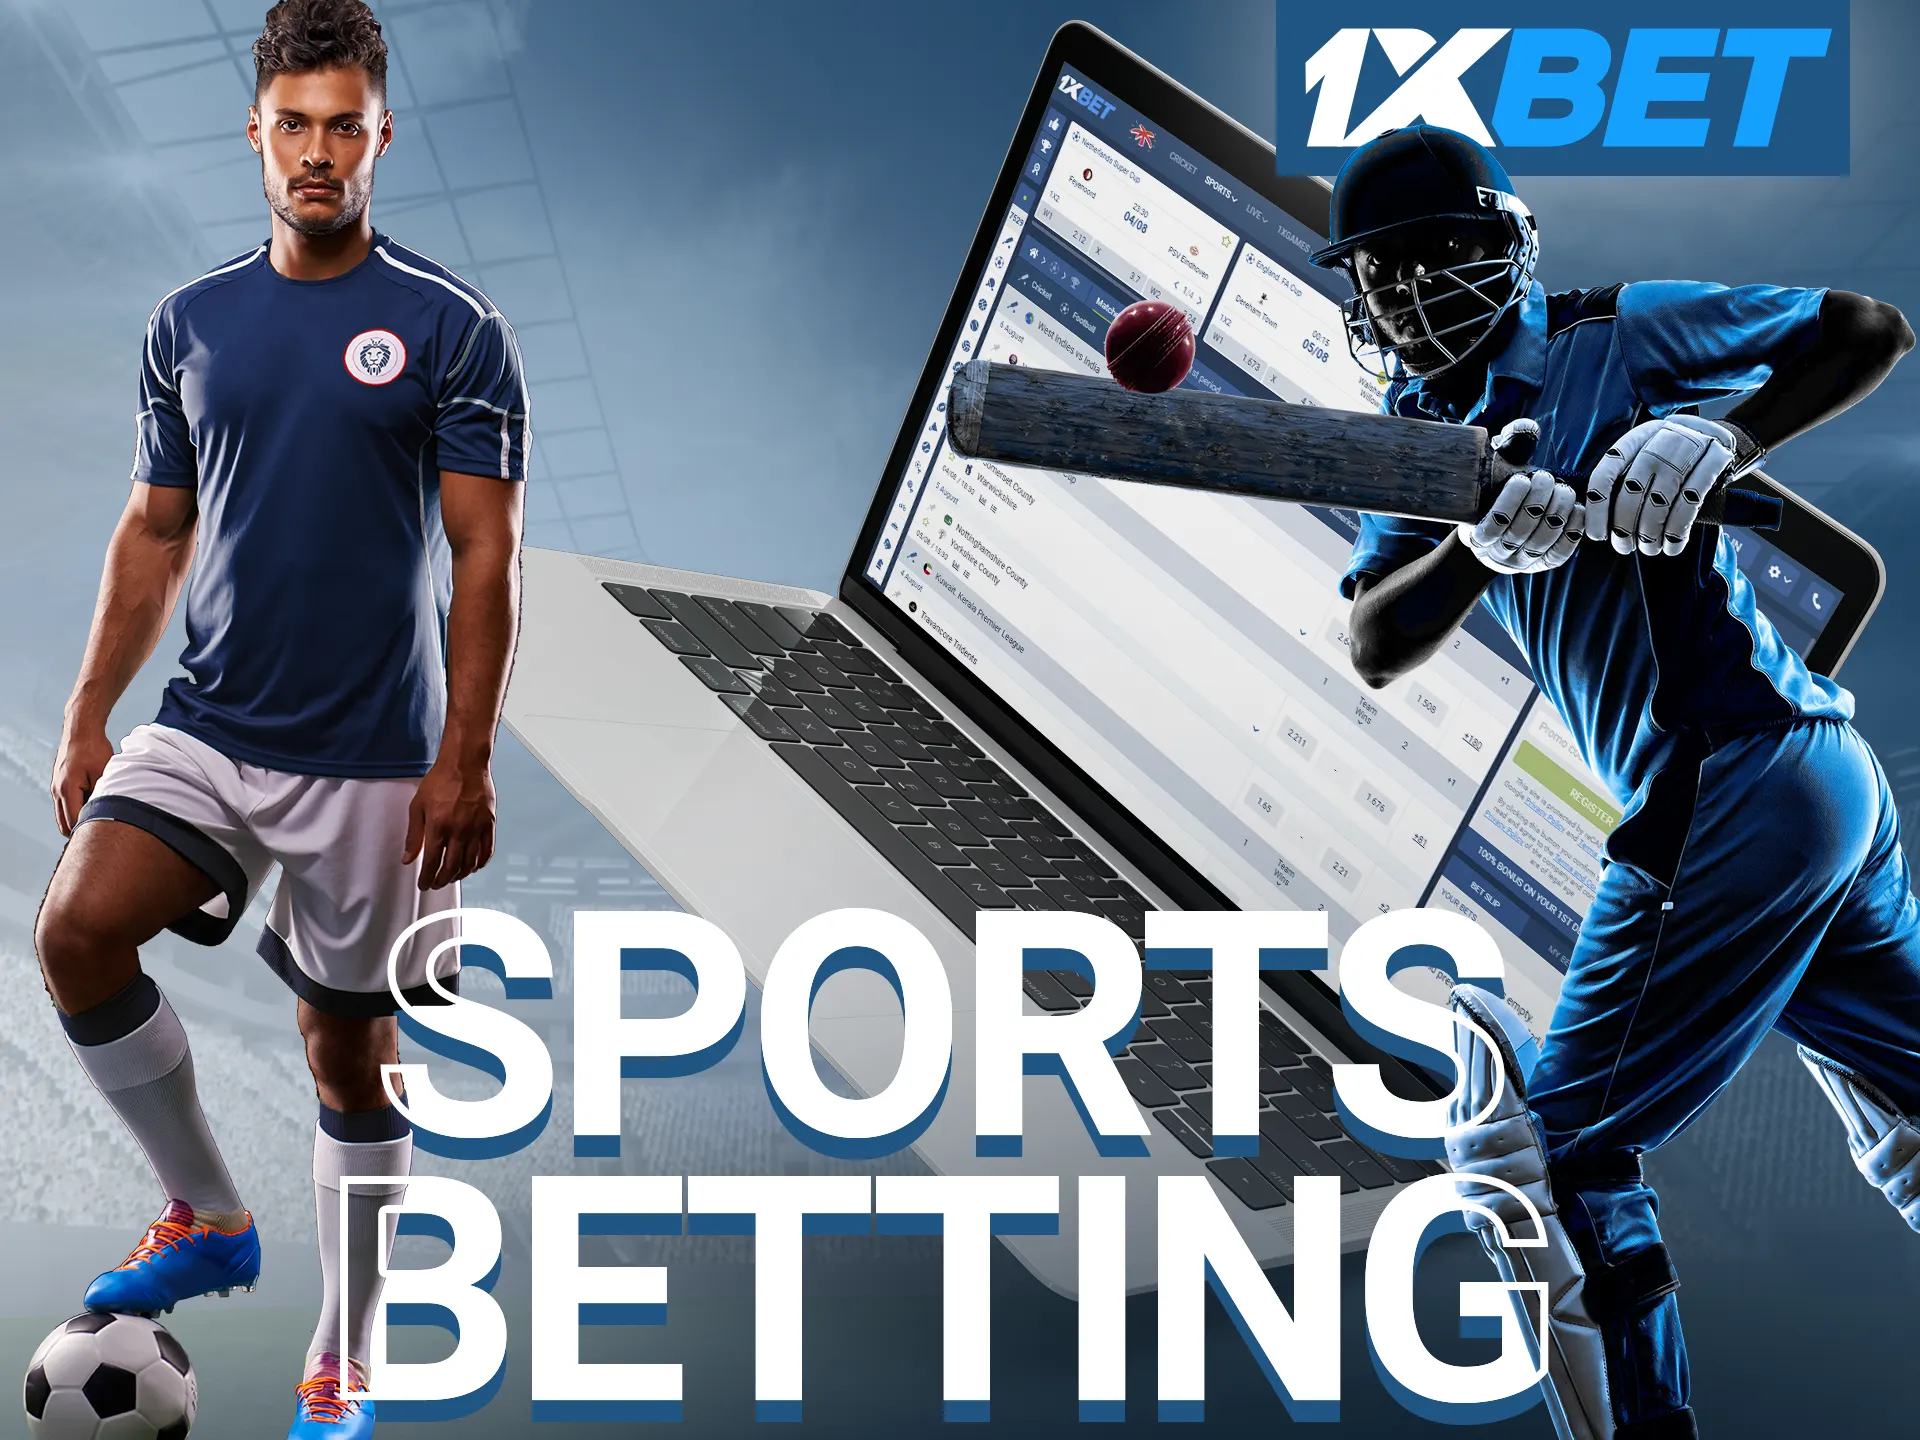 1xBet provides customers with a wide range of opportunities to bet on their favorite sports and esports events.